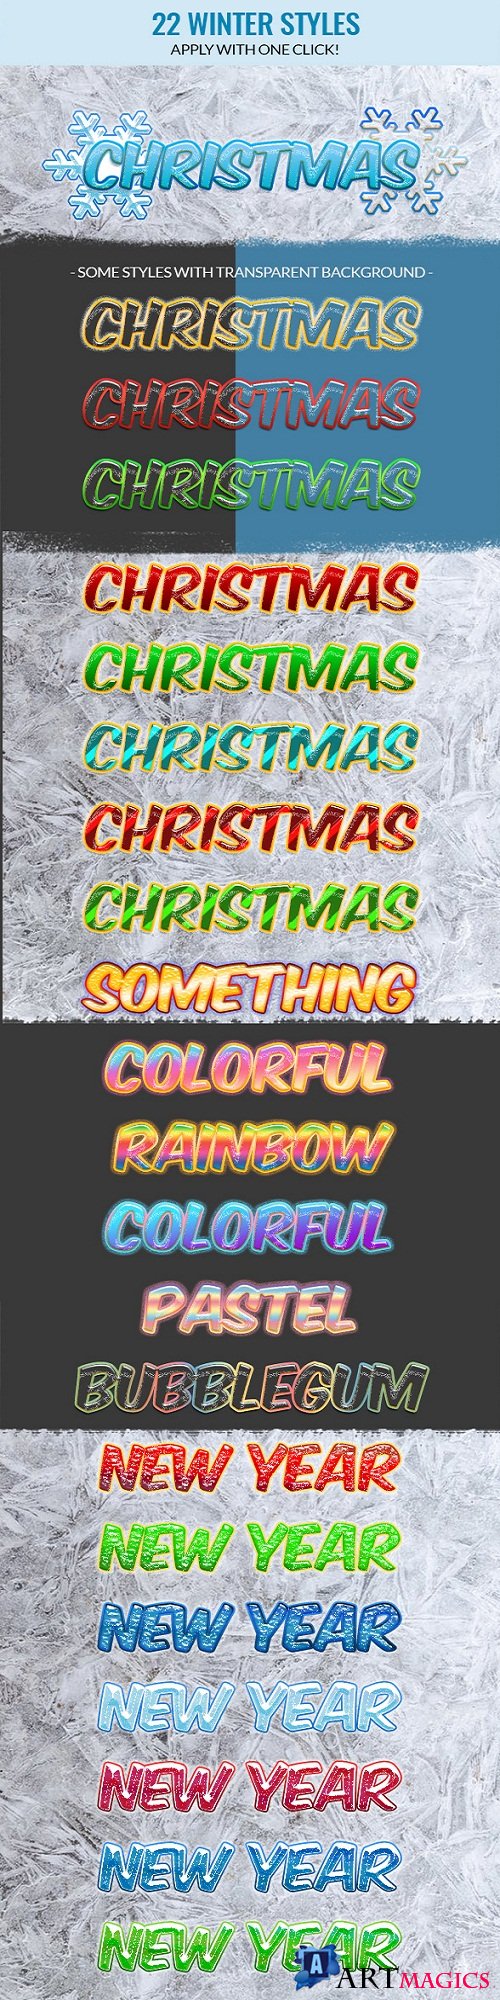 Holiday Christmas Photoshop Text Styles 21078144